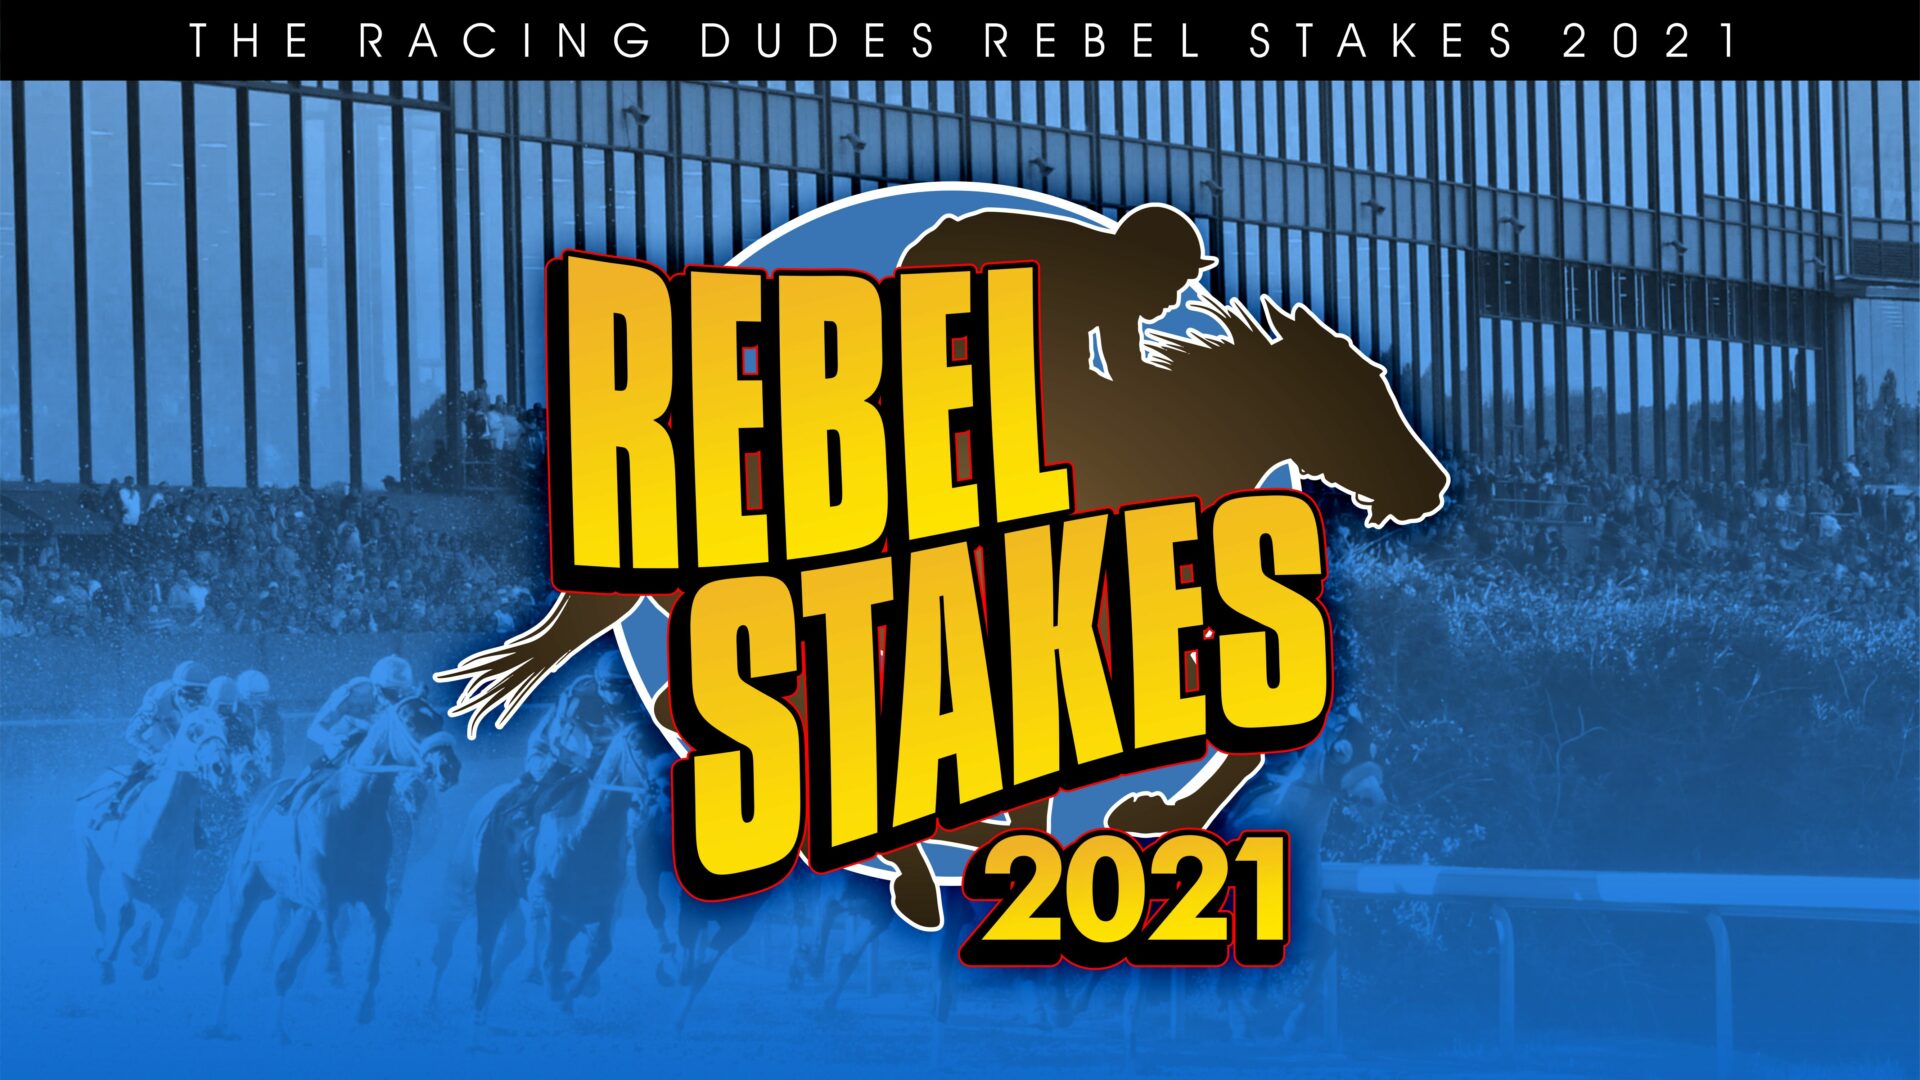 Racing Dudes 2021 Rebel Stakes Wagering Guide and Picks Racing Dudes